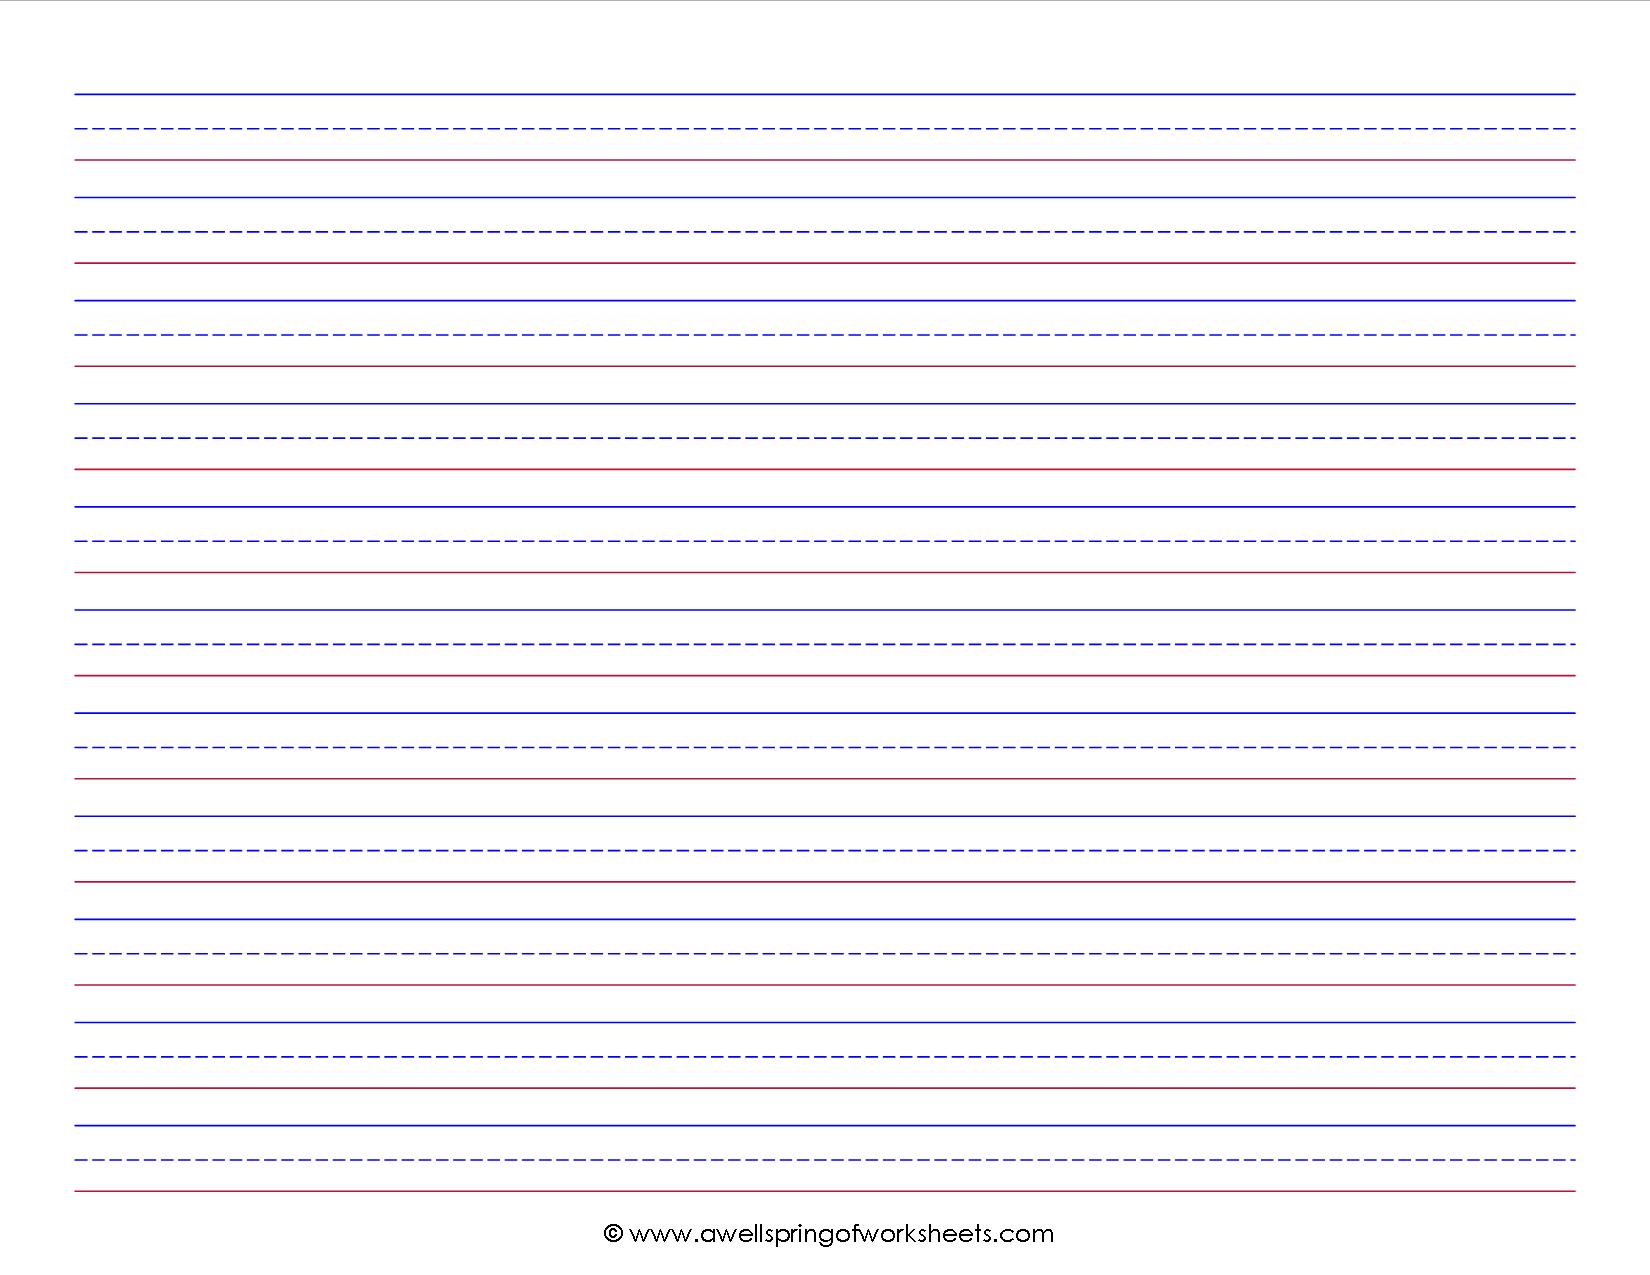 8-best-images-of-printable-lined-writing-paper-landscape-printable